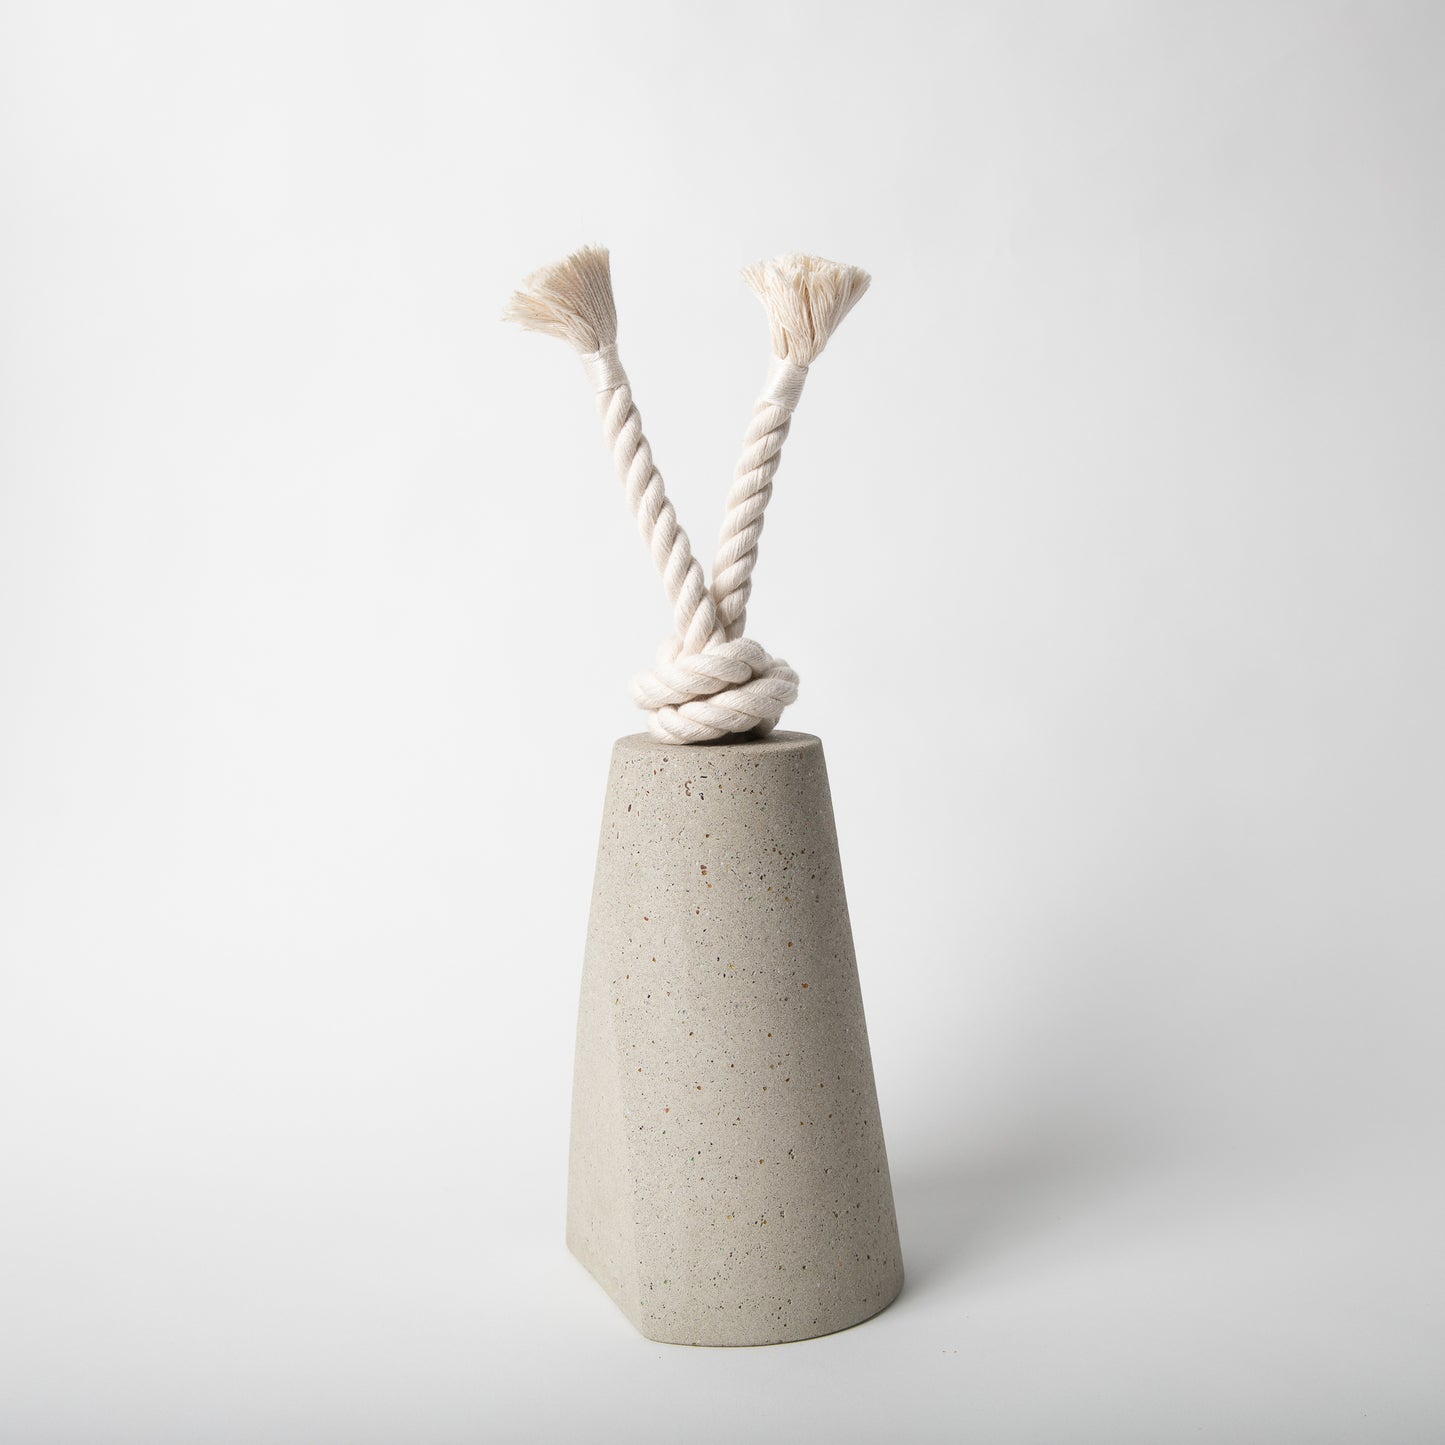 Concrete terrazzo doorstop with cotton rope in natural.